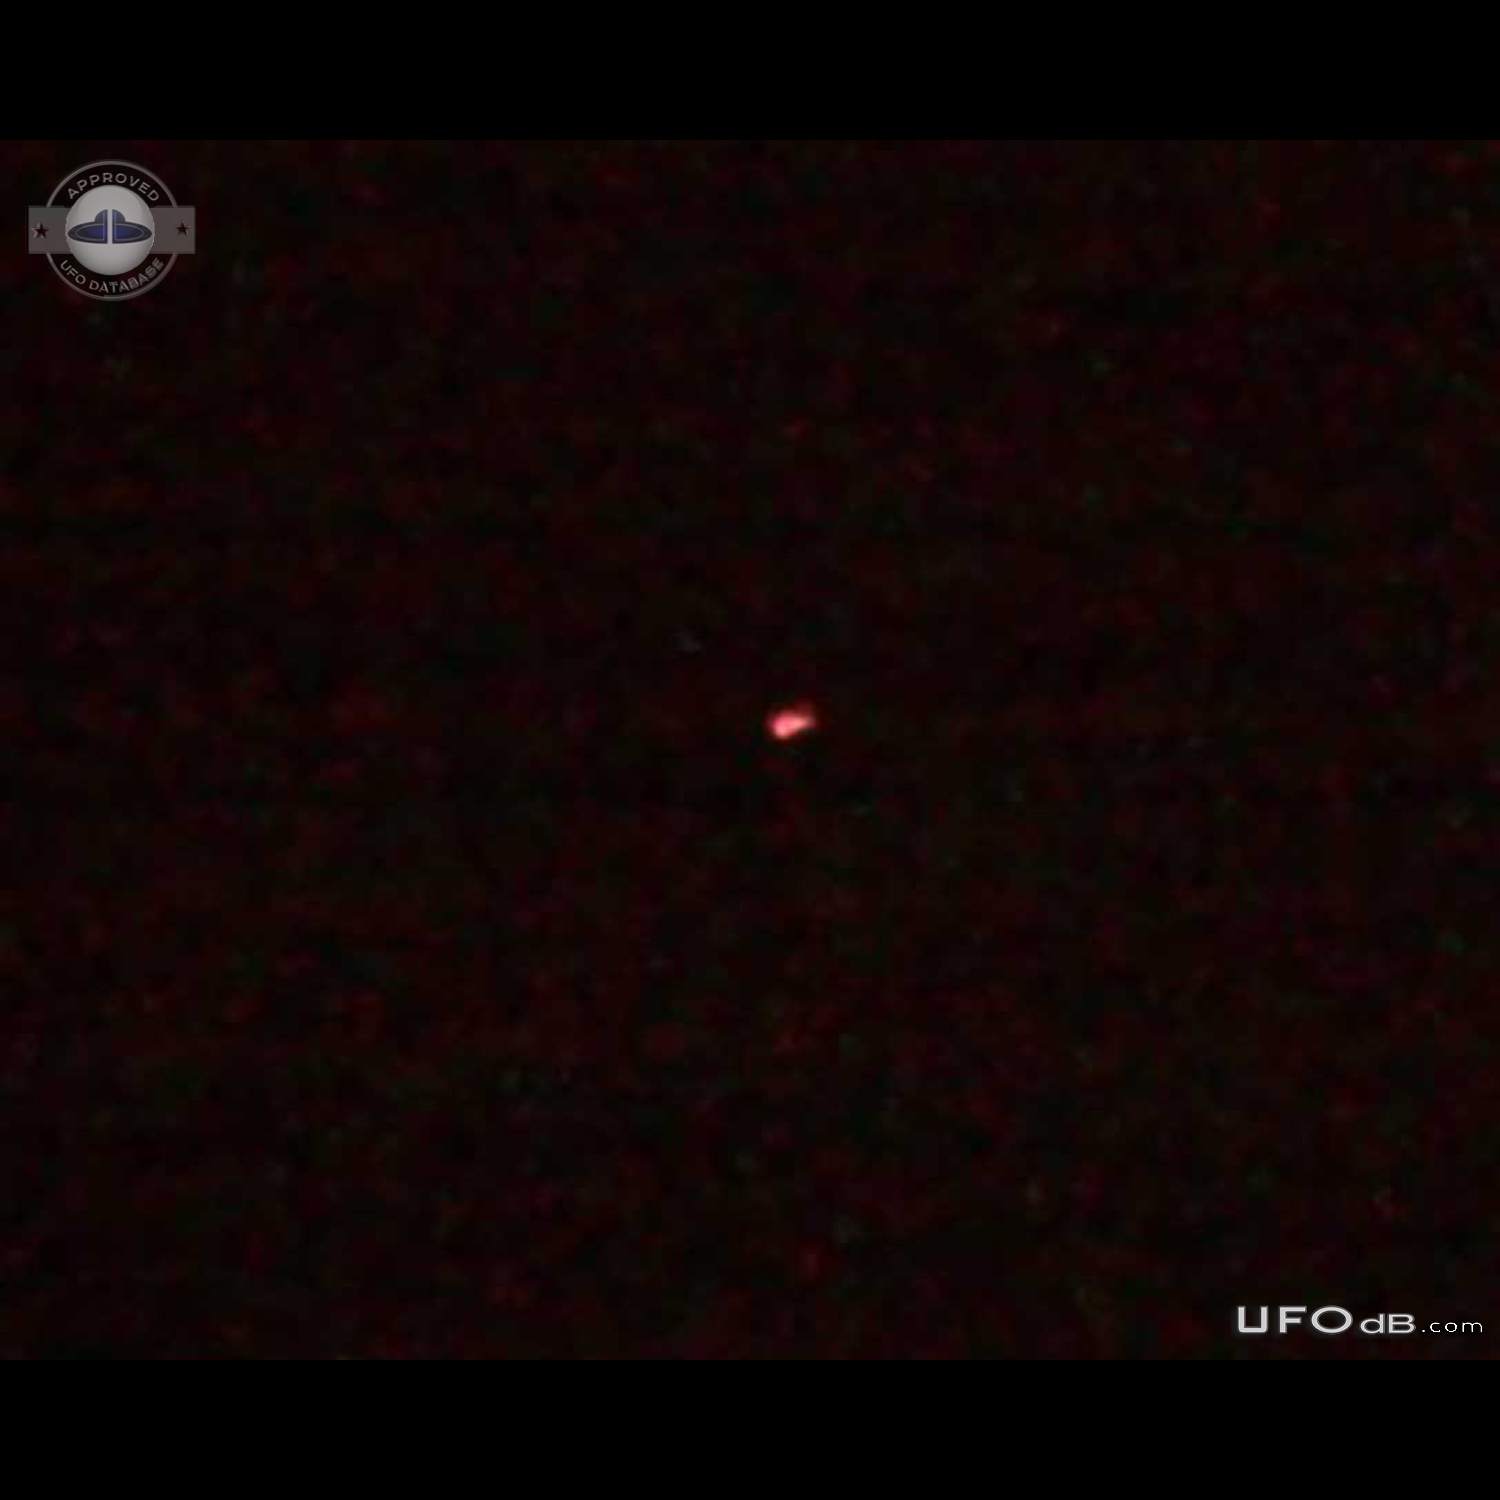 There was an orange glowing UFO in the sky - Hamilton Ontario Canada 2 UFO Picture #772-1